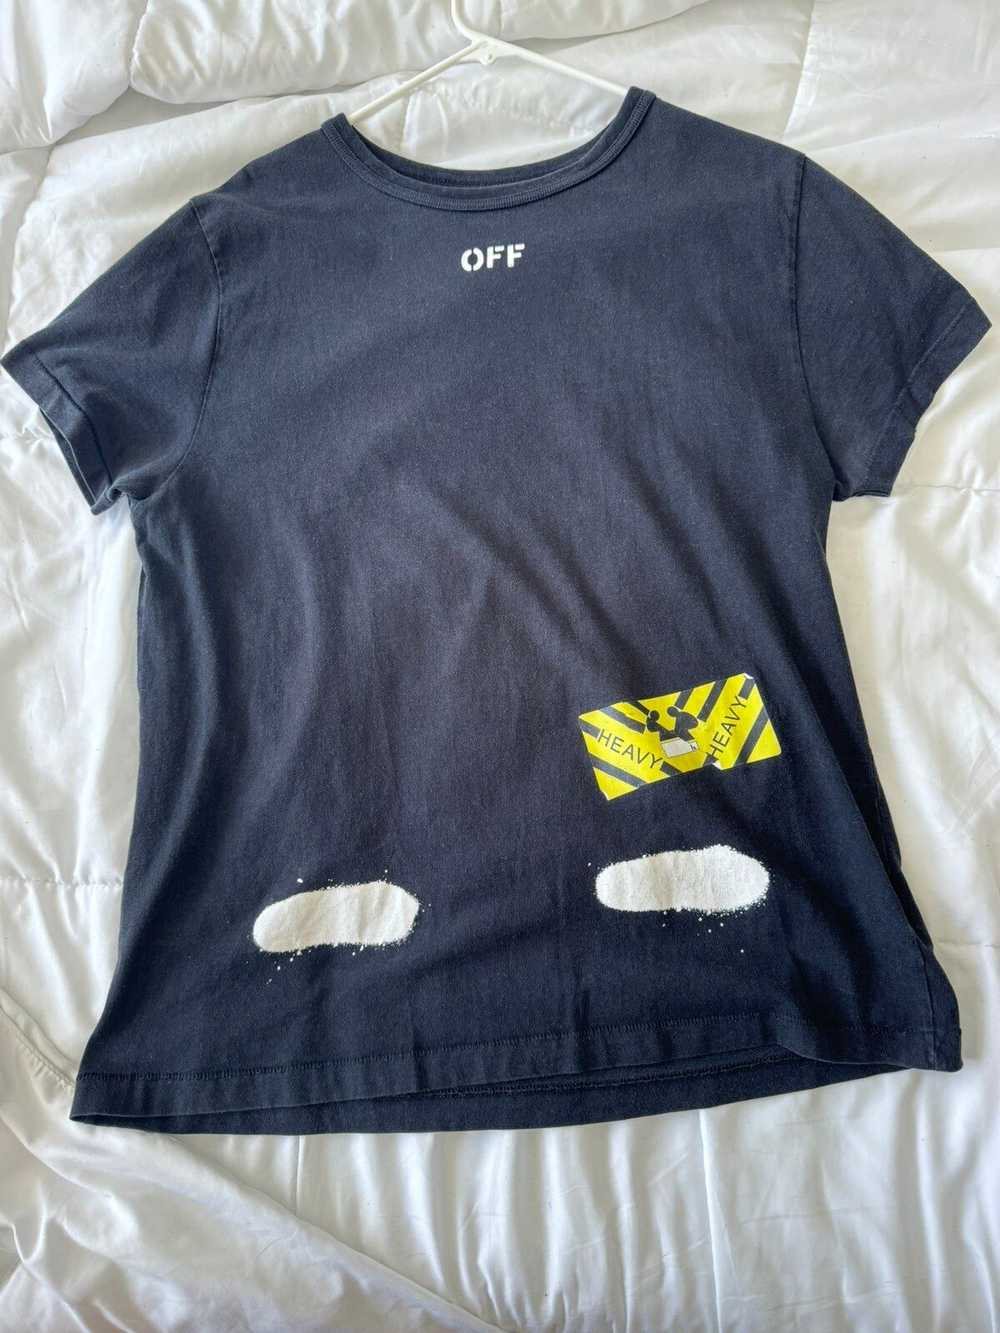 Off-White Off-White Spray Tee/T-Shirt Size Small … - image 1